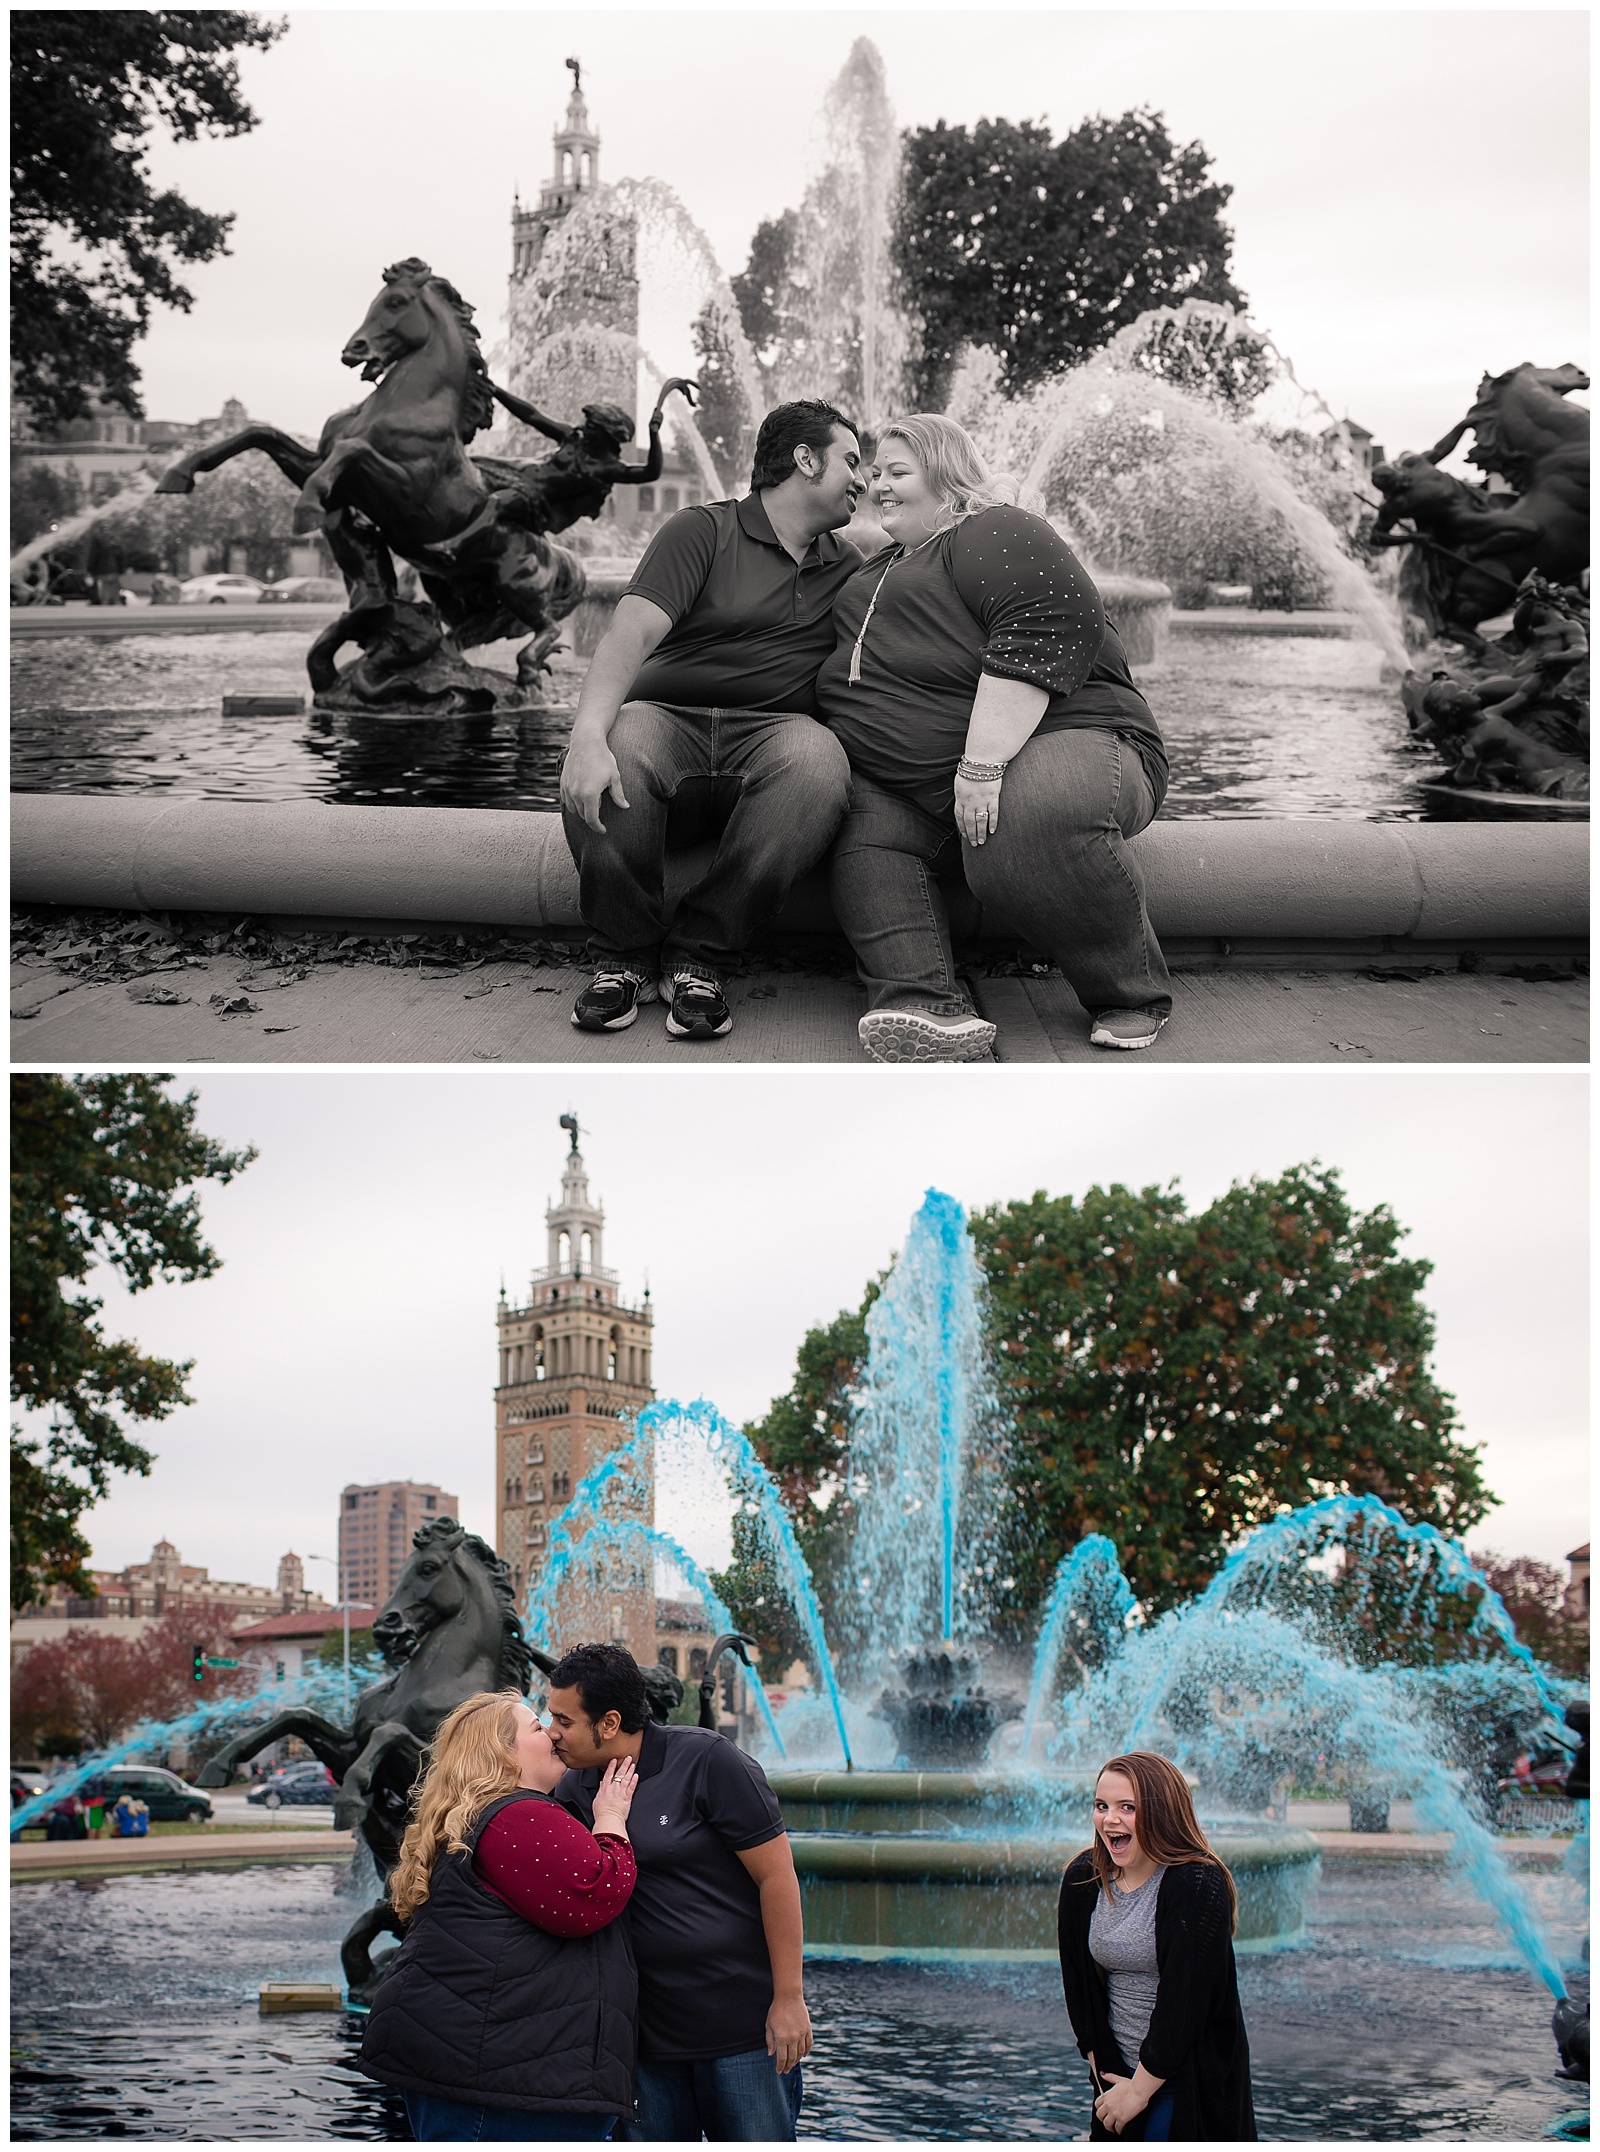 An engagement session at the J.C. Nichols Memorial Fountain in Kansas City.